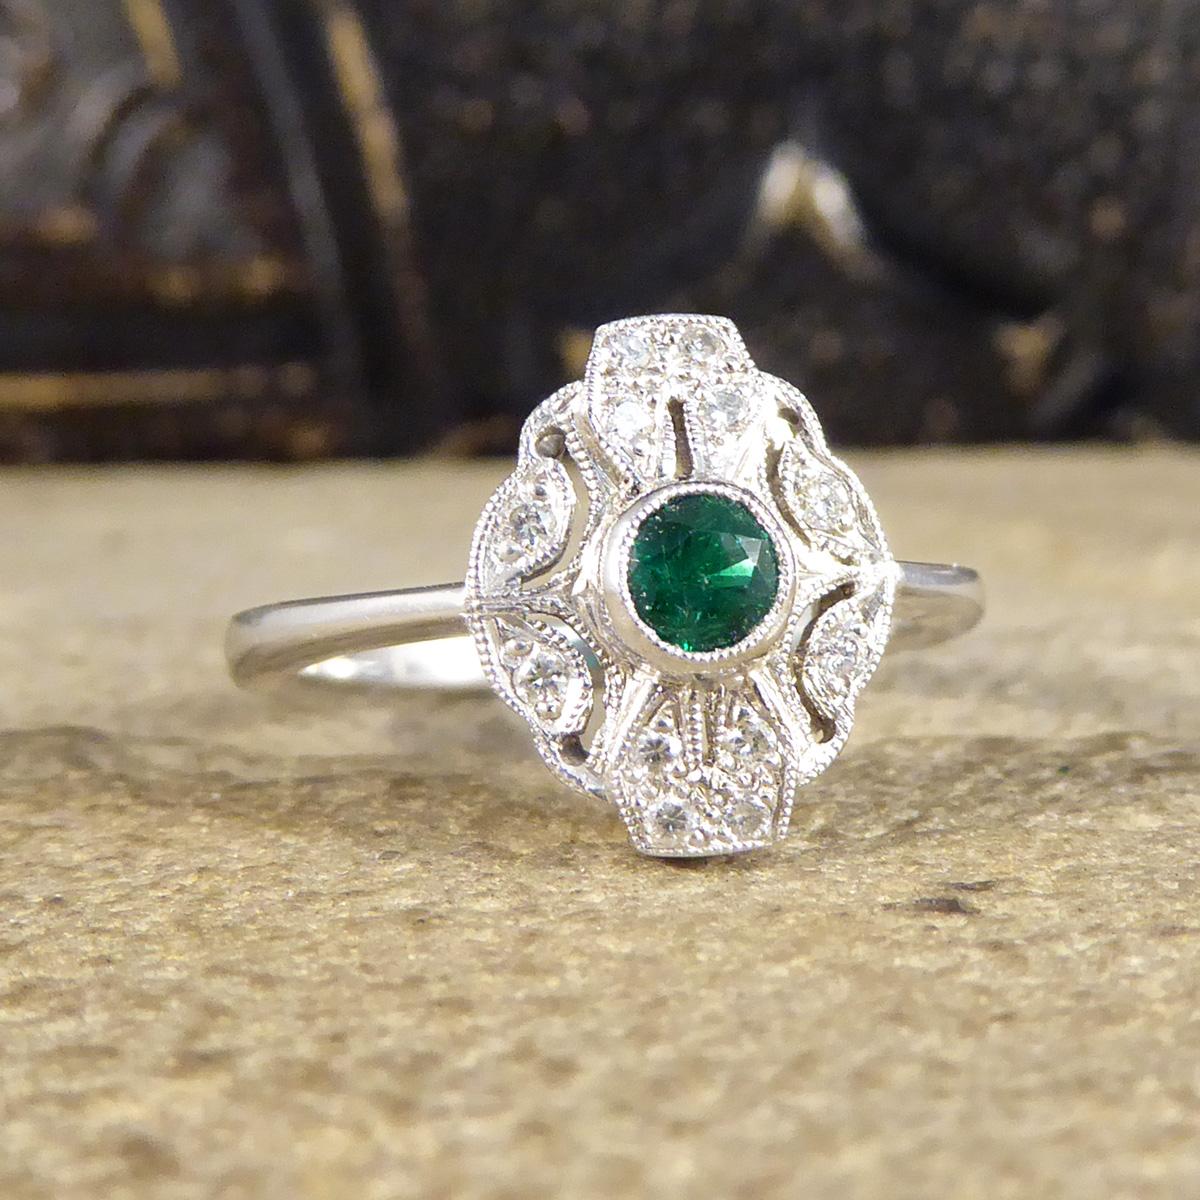 This stunning ring has been hand crafted and is new and never worn. It has been designed and carefully crafted to resemble an Art Deco style ring with a collar set bright enchanted green Emerald weighing 0.19ct in the centre with a milgrain edge